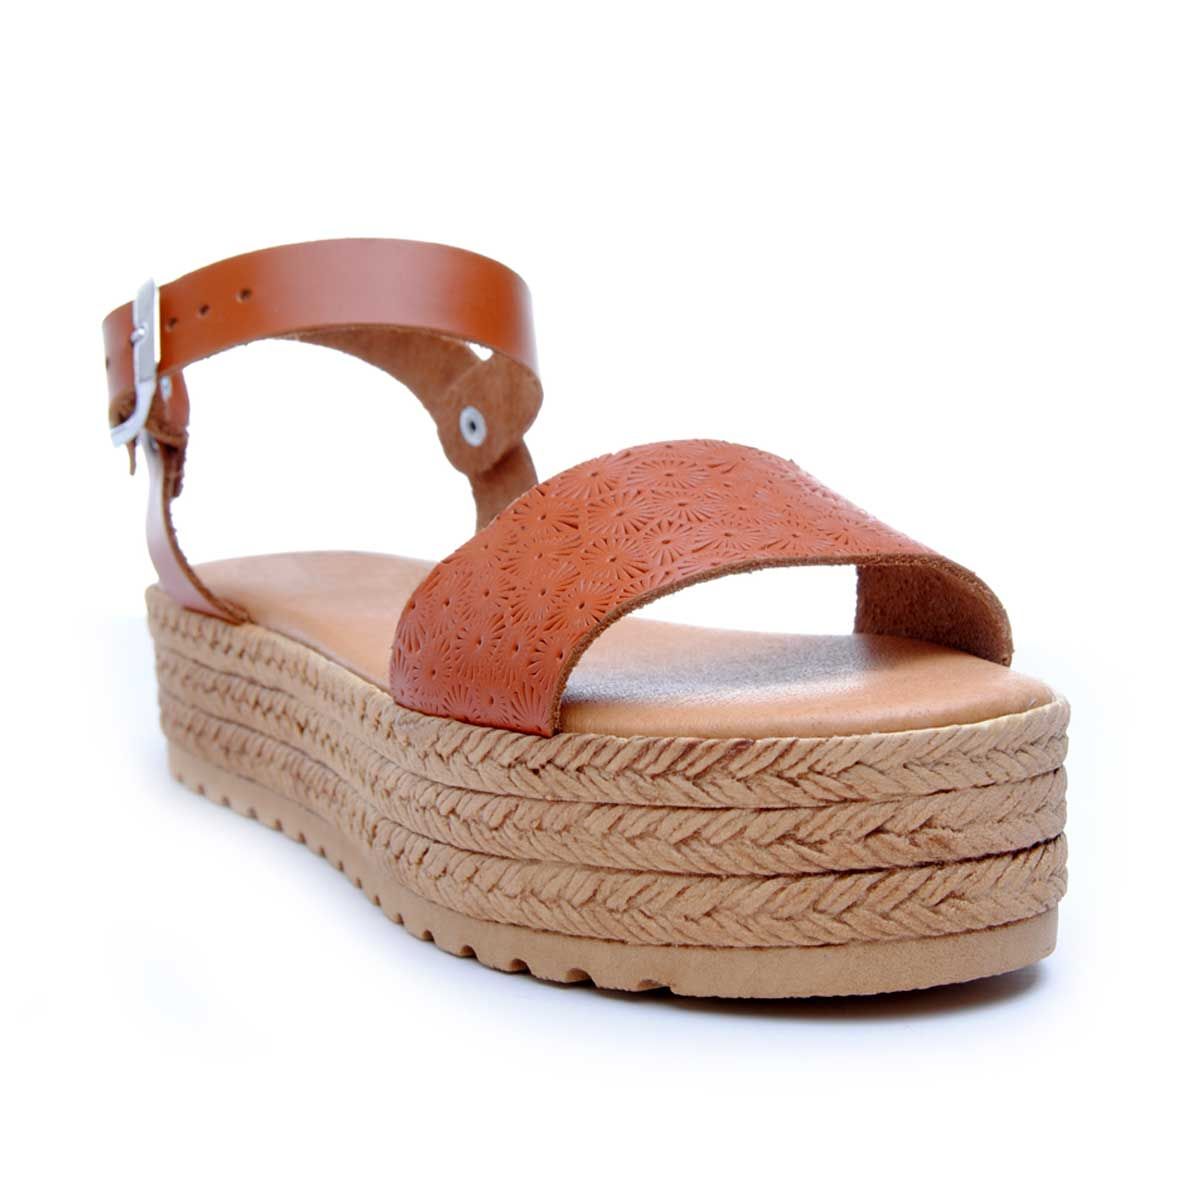 Comfortable and light Sandal of lady, with platform. Manufactured in first quality natural leather, chrome-free 6. It carries buckle closure on the ankle, for greater fastening. Comfortable and very flexible hormo, perfectly adjustable at the foot. Leather template with Memory Gel Comfort, for comfort in the tread. Polyurethane floor, with imitation platform to the Spotto. The polyurethane material is not split, does not wear, it is non-slip and makes it the lighter footwear. Without a doubt, it is the perfect sandal for your day by day. Made in Spain. 10 years of Purapiel Guarantee.